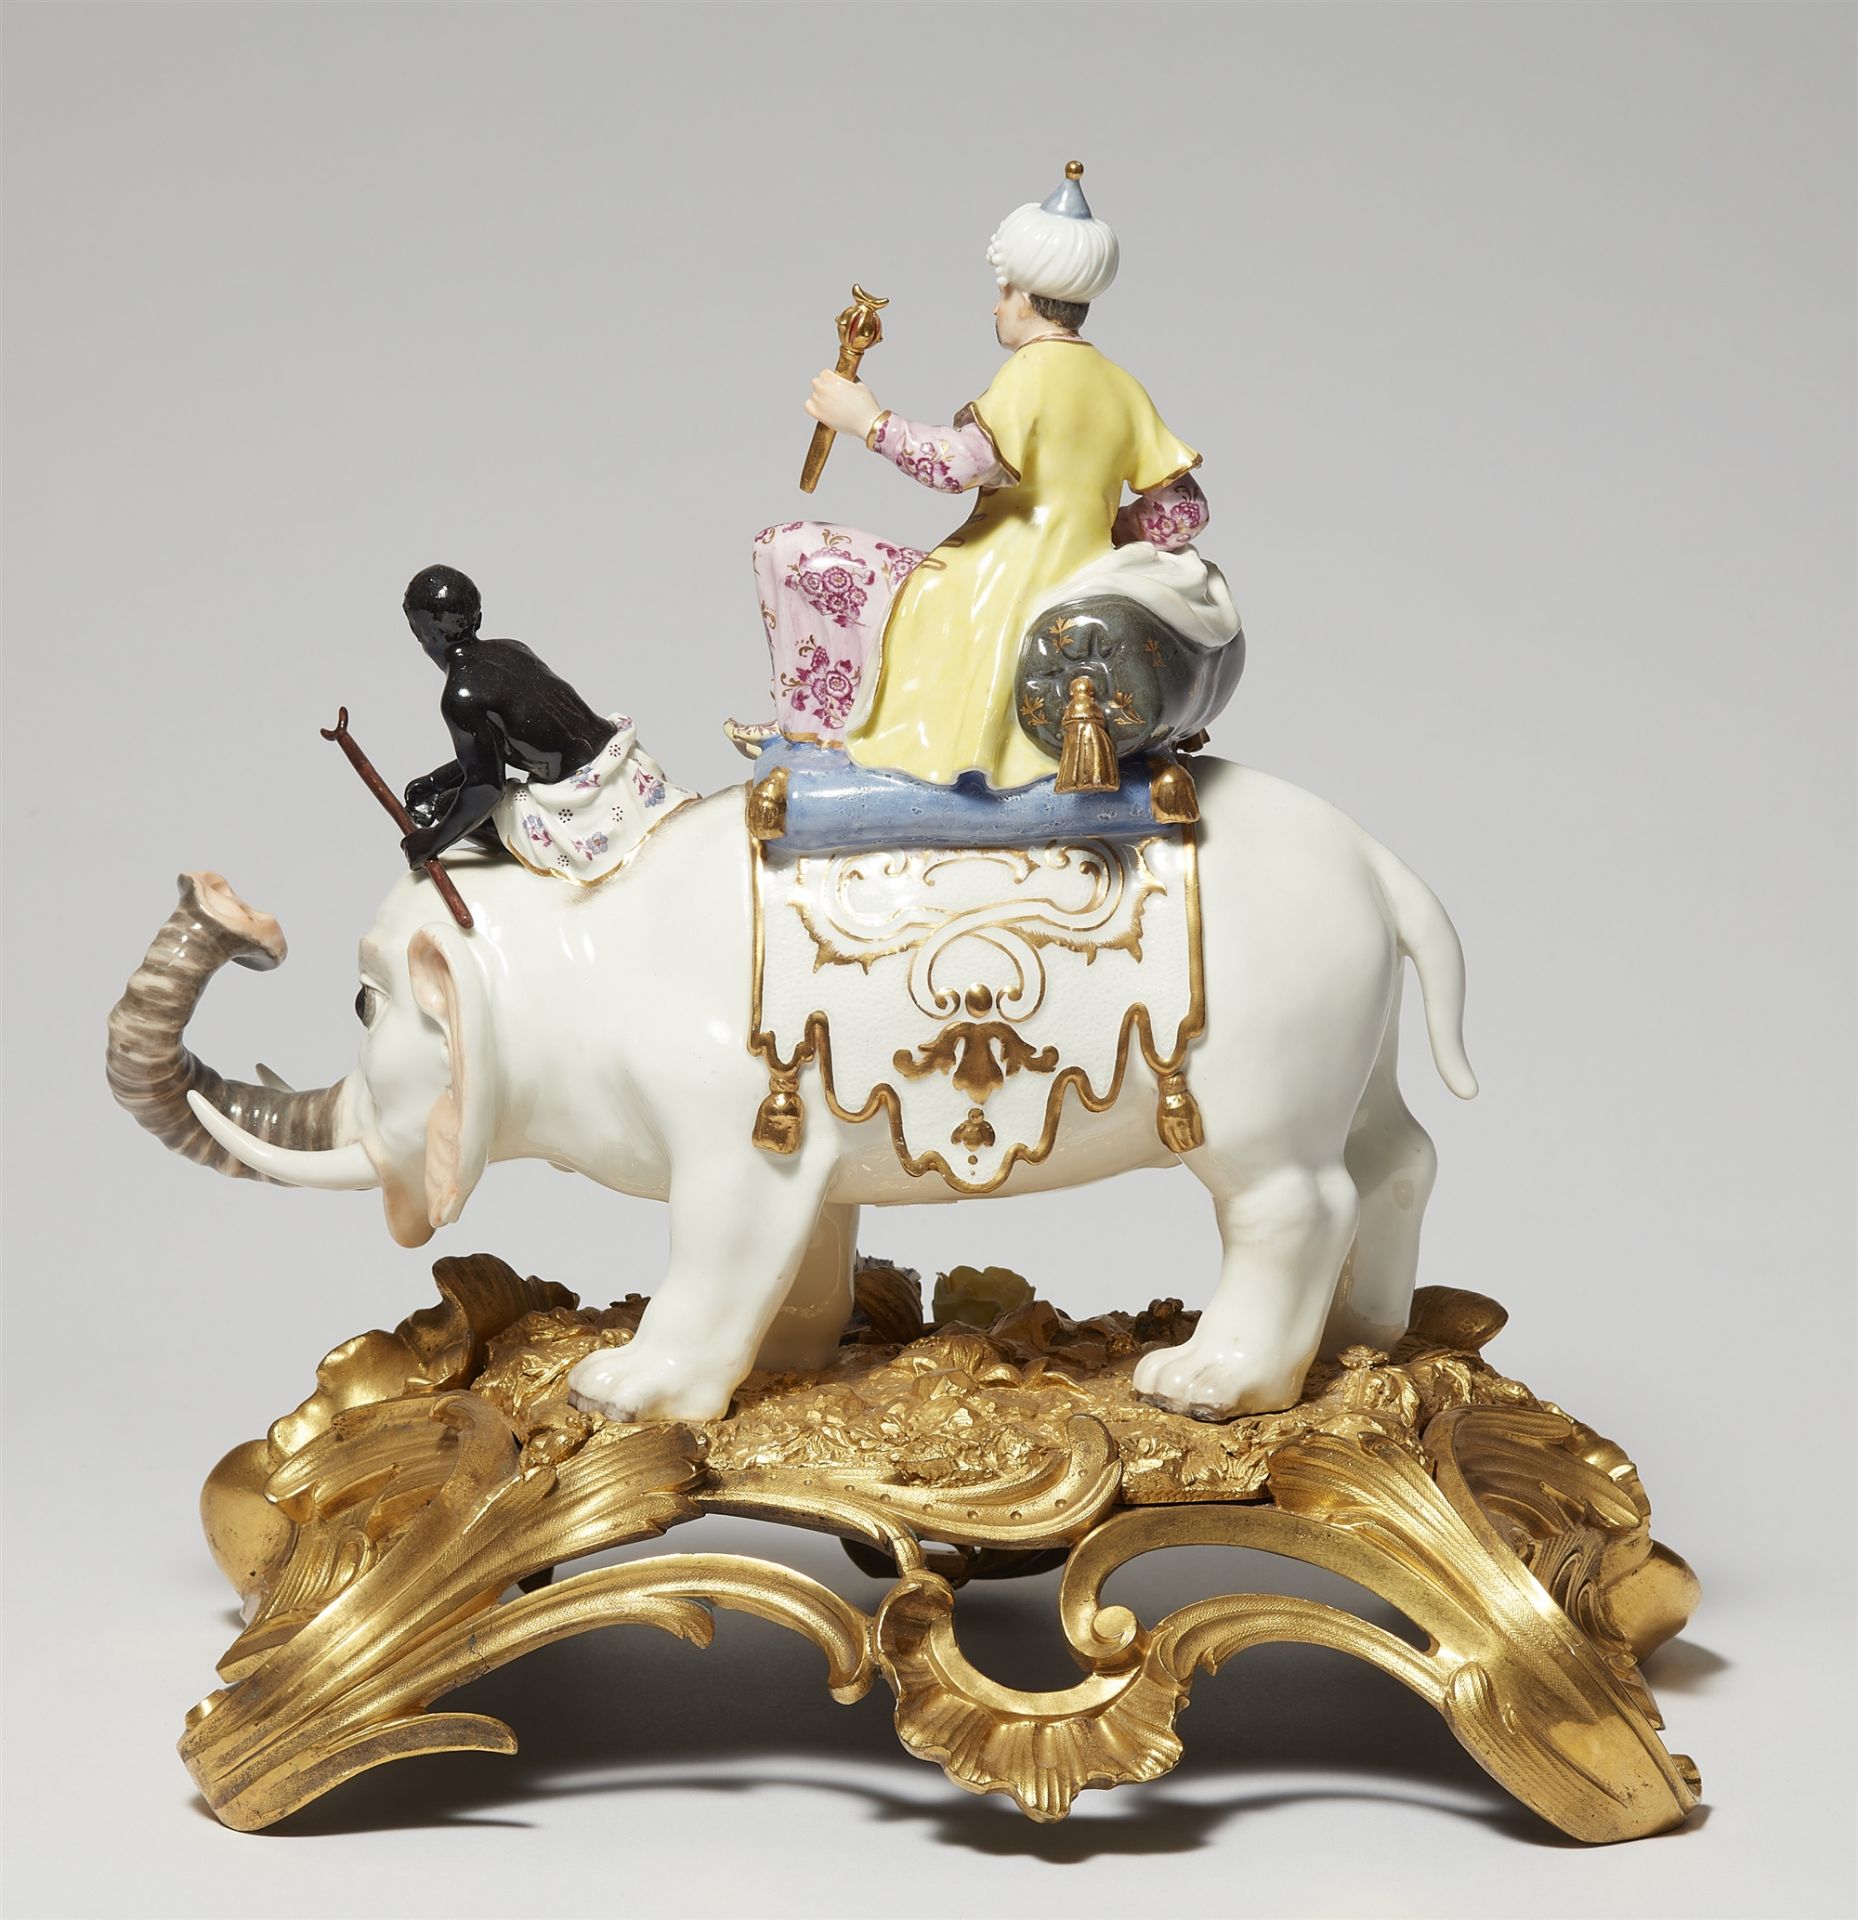 A Meissen porcelain model of a Sultan and an African on an elephant - Image 2 of 9